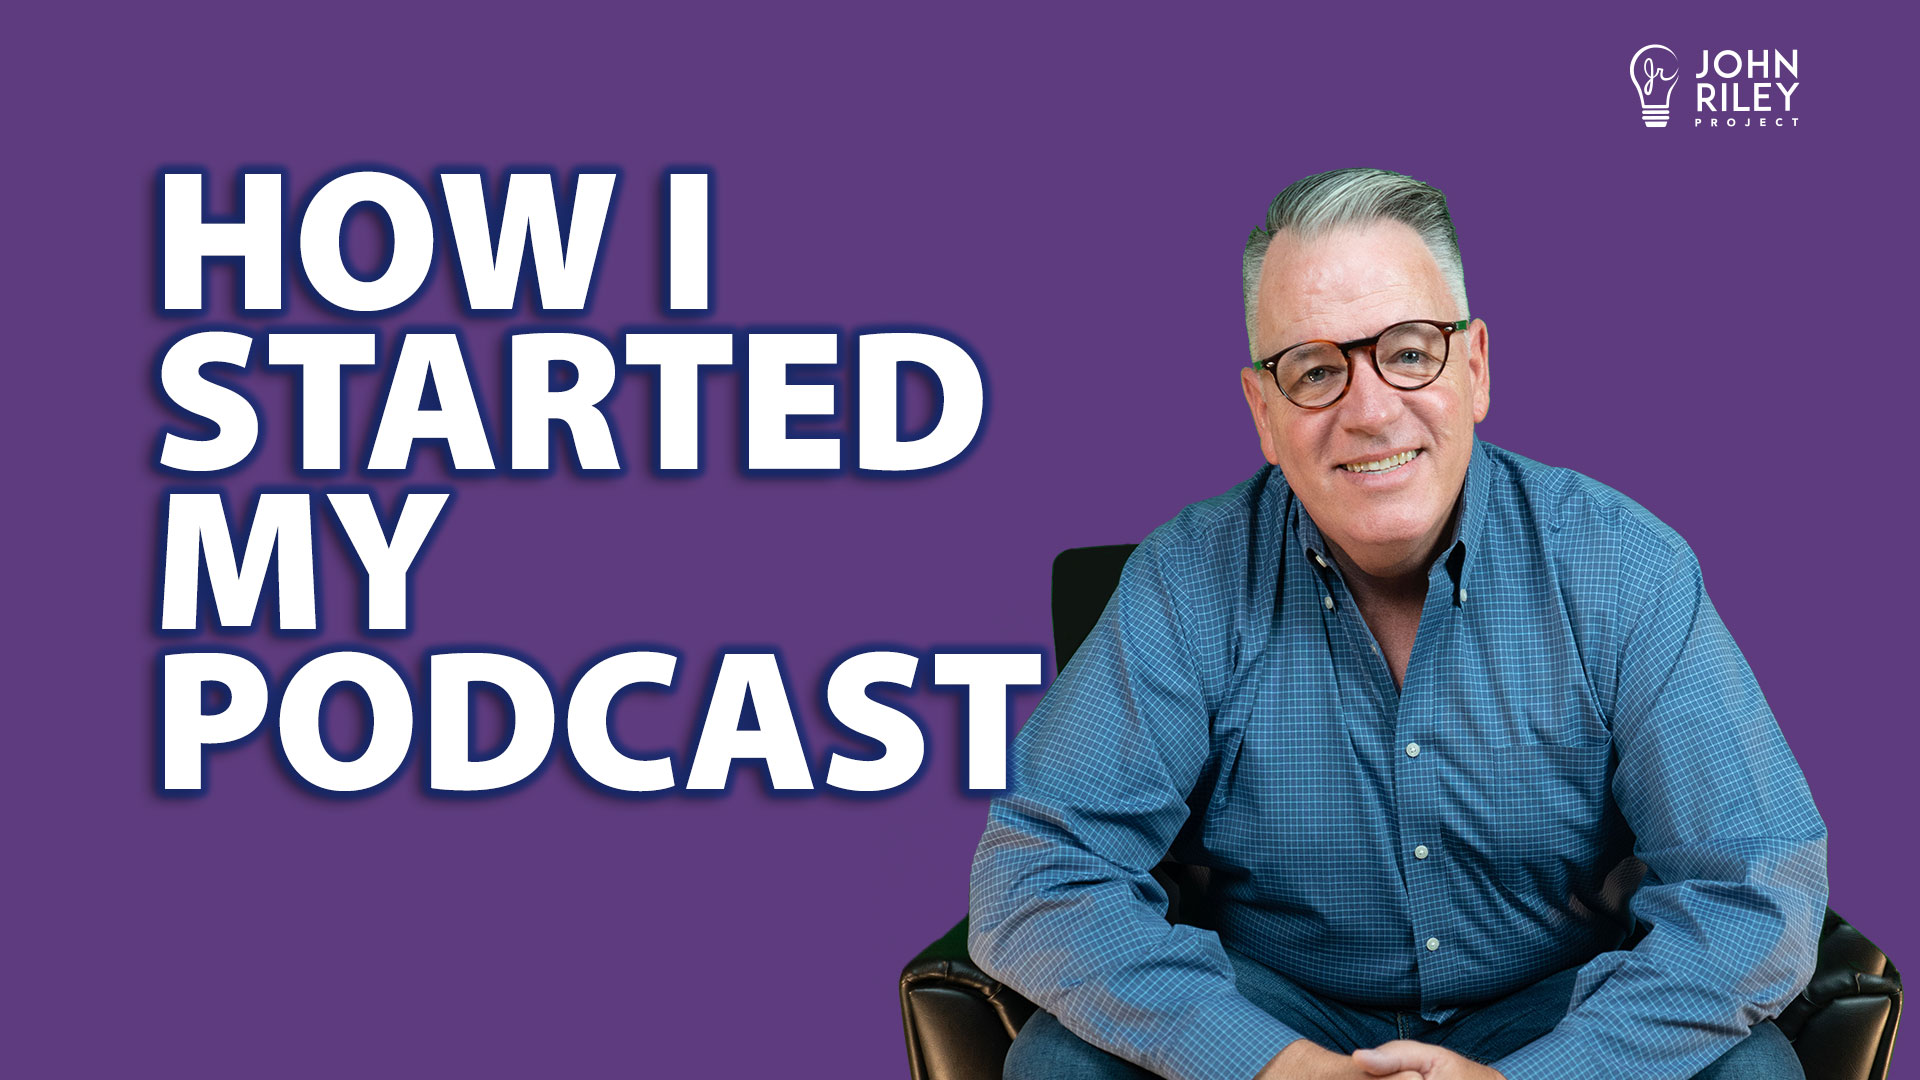 How I started my podcast, john riley project, jrp0282